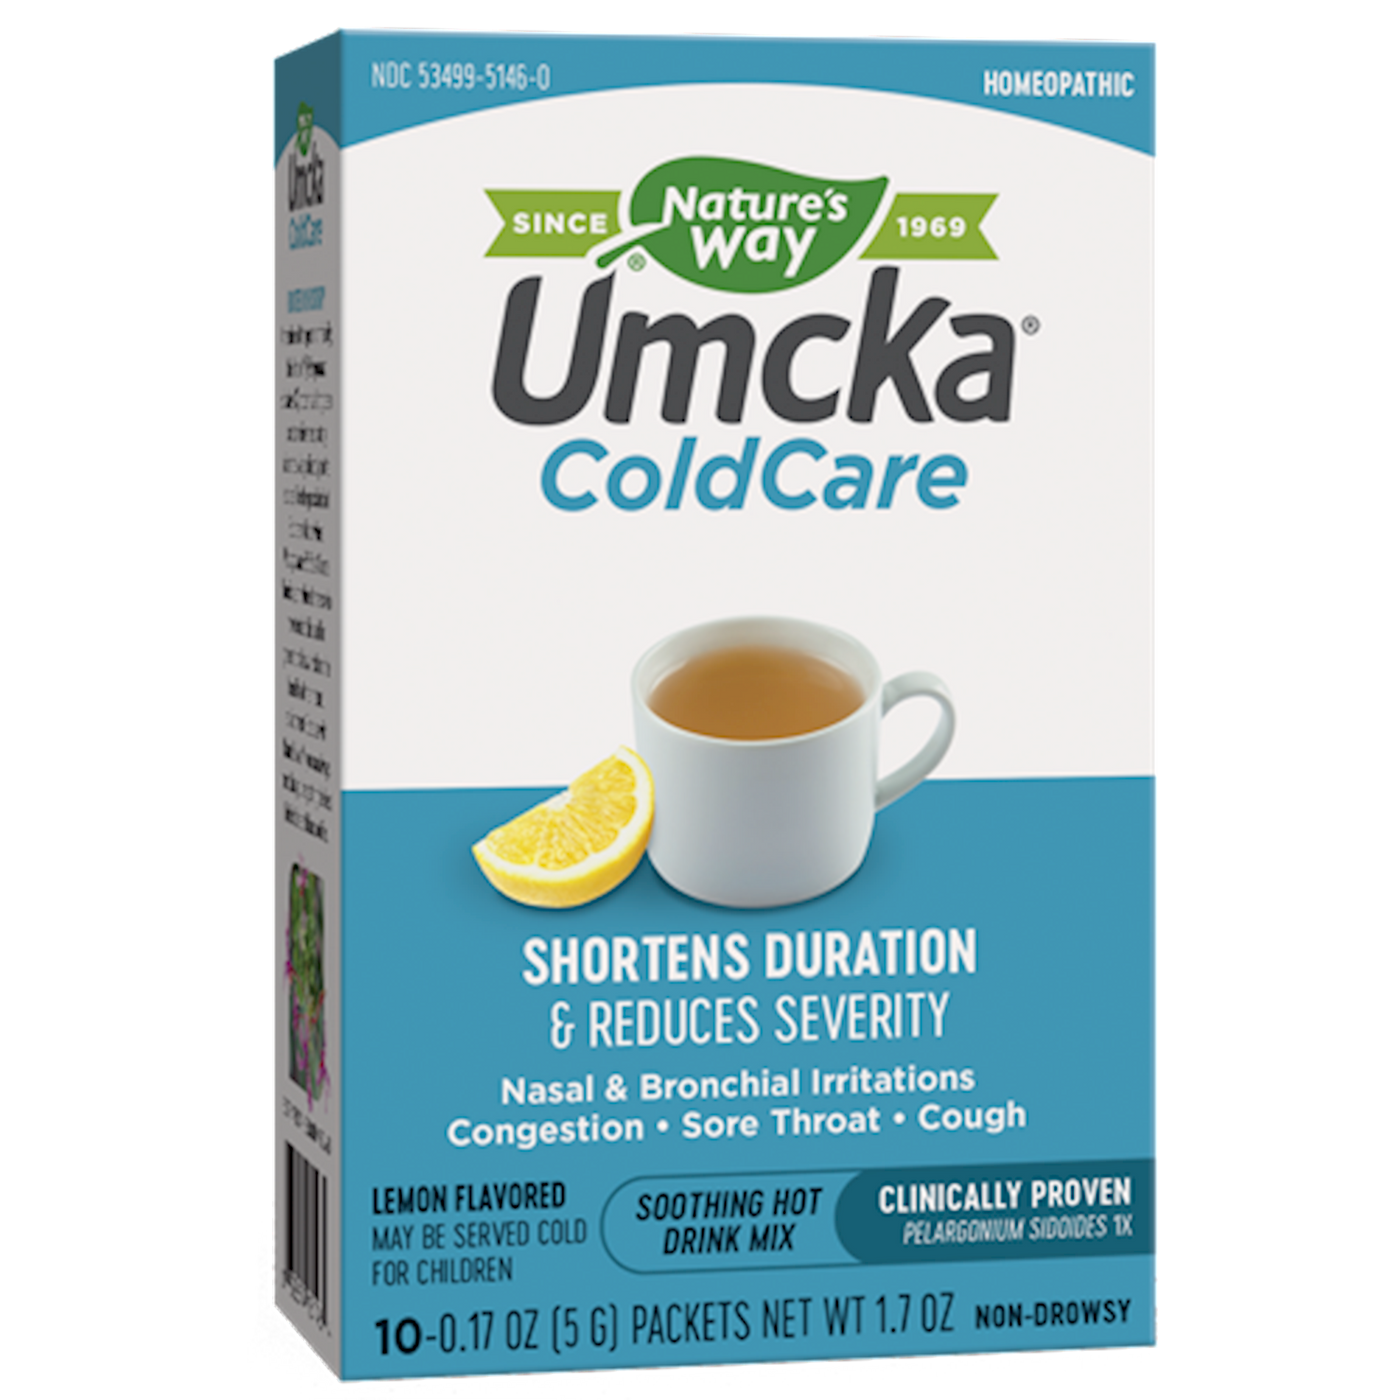 Umcka ColdCare Hot Lemon s Curated Wellness